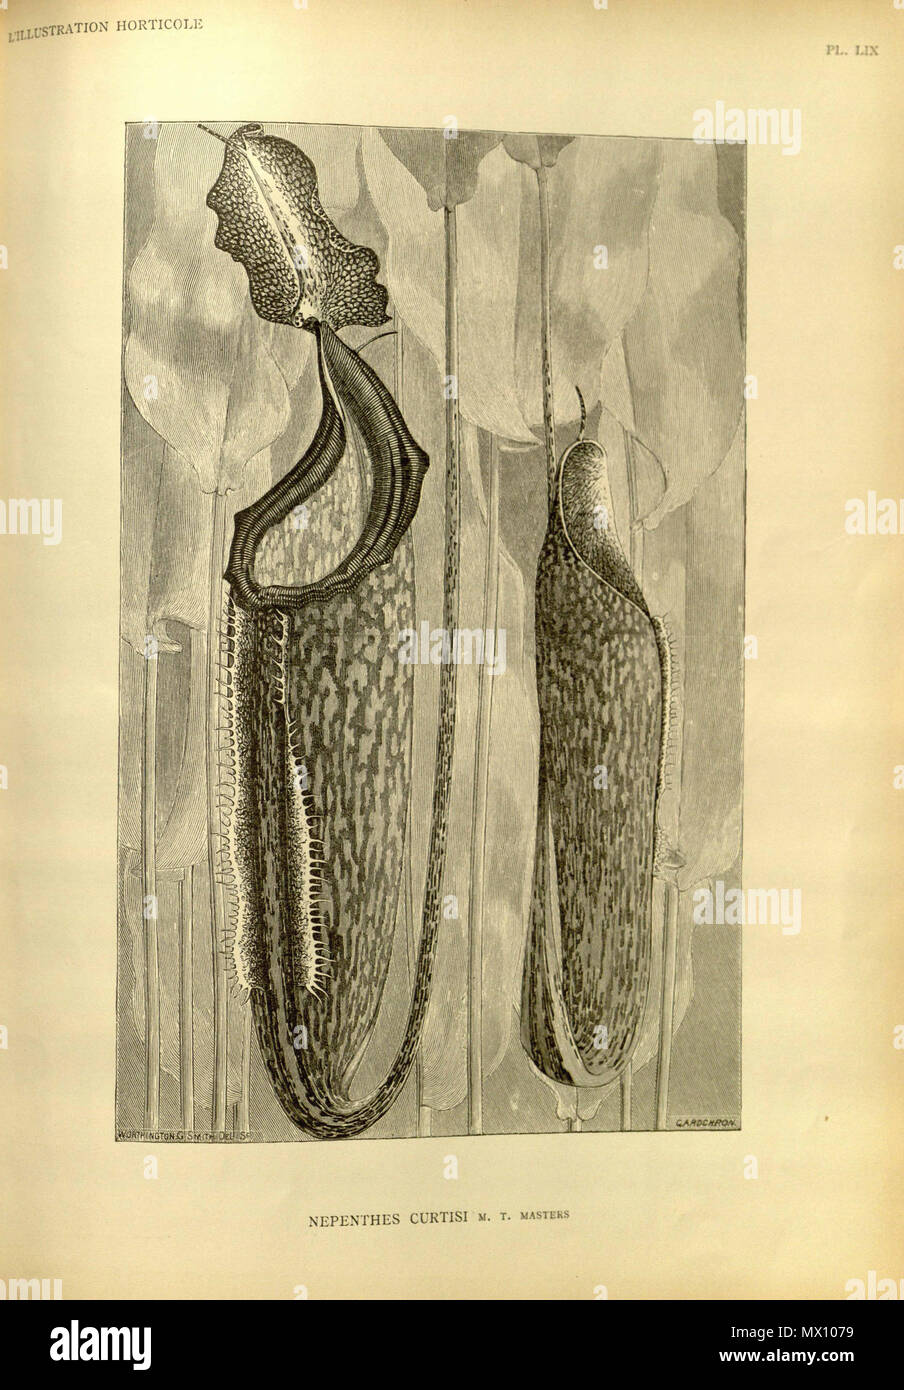 441 Nepenthes curtisii - L’Illustration horticole (1888) Stock Photo